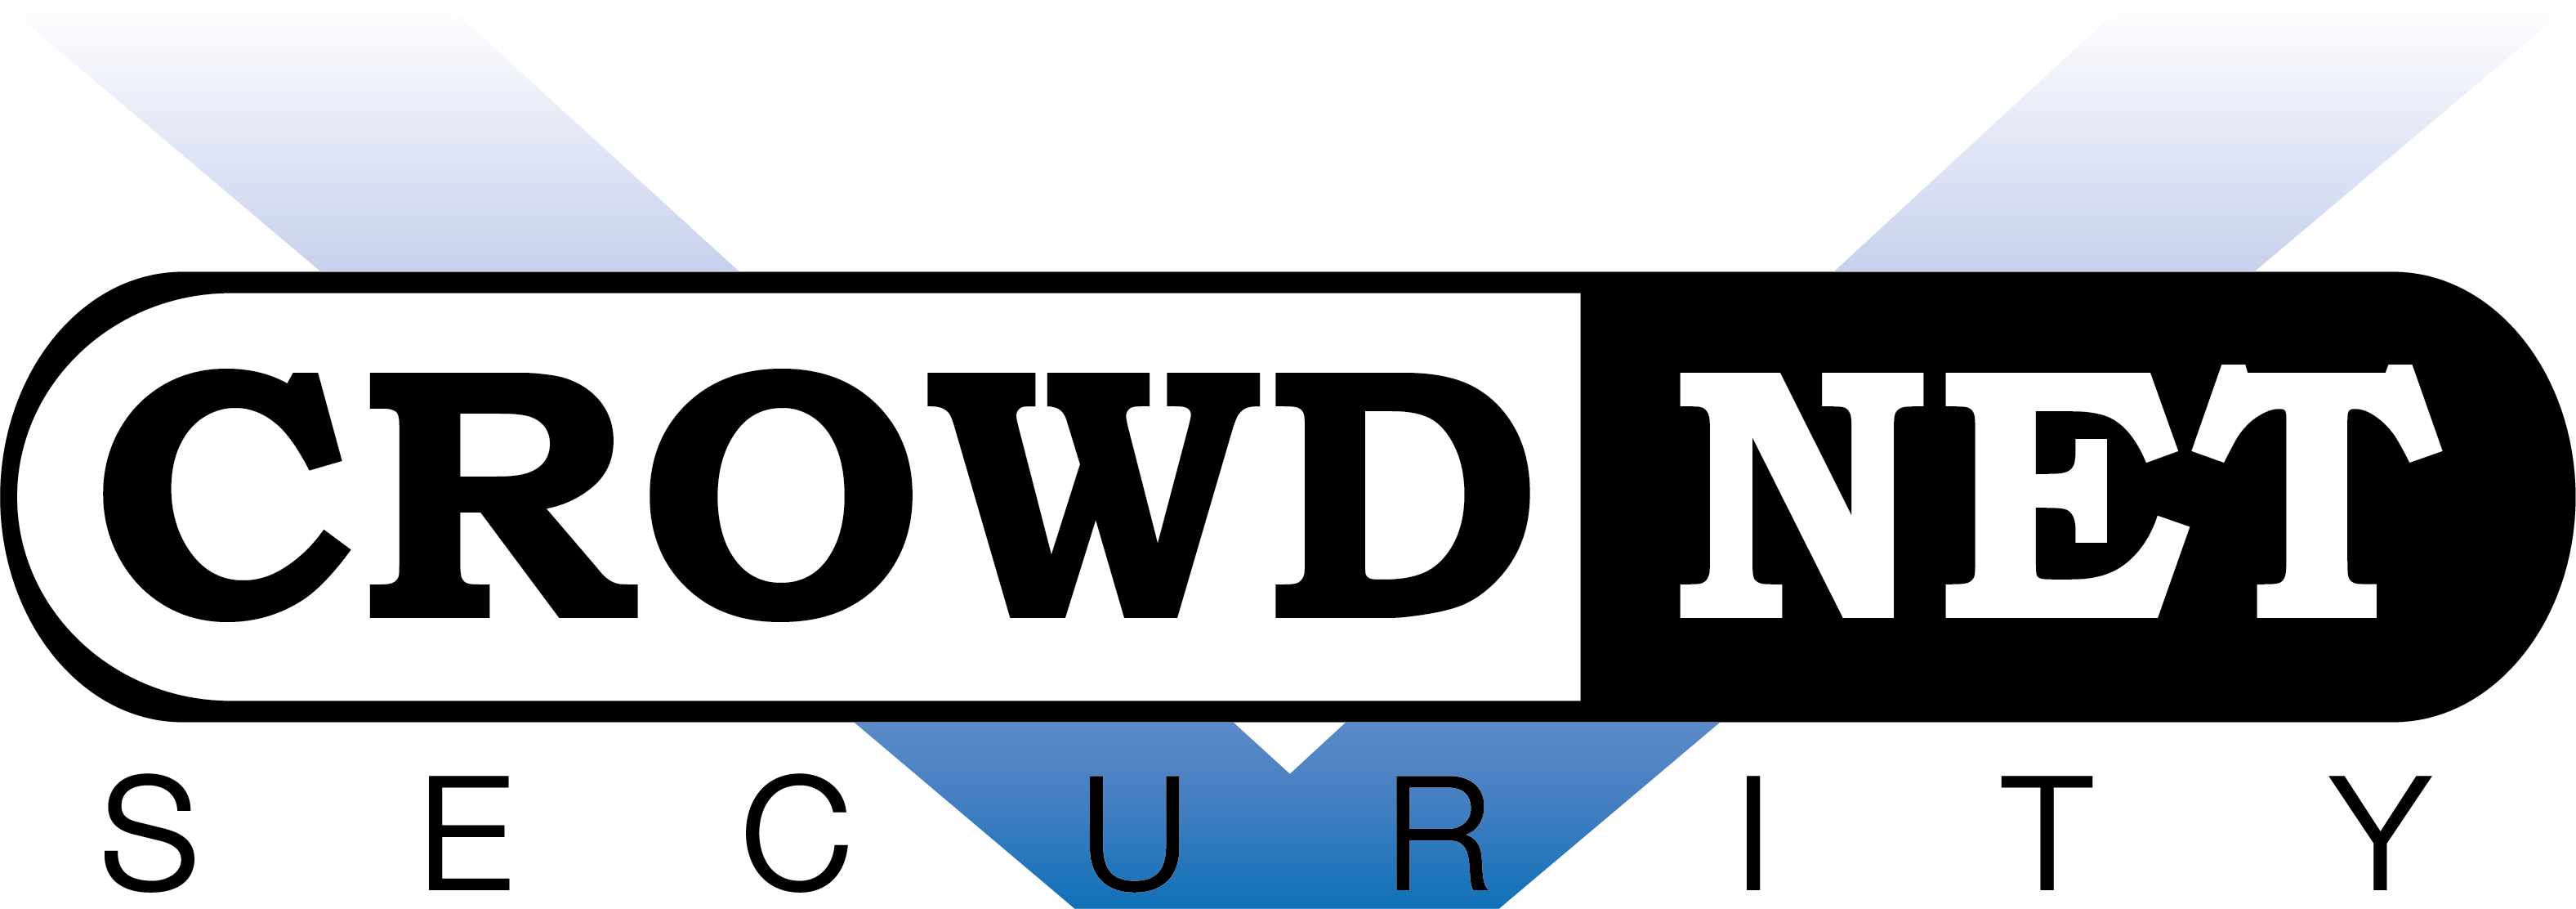 Crowdnet Security